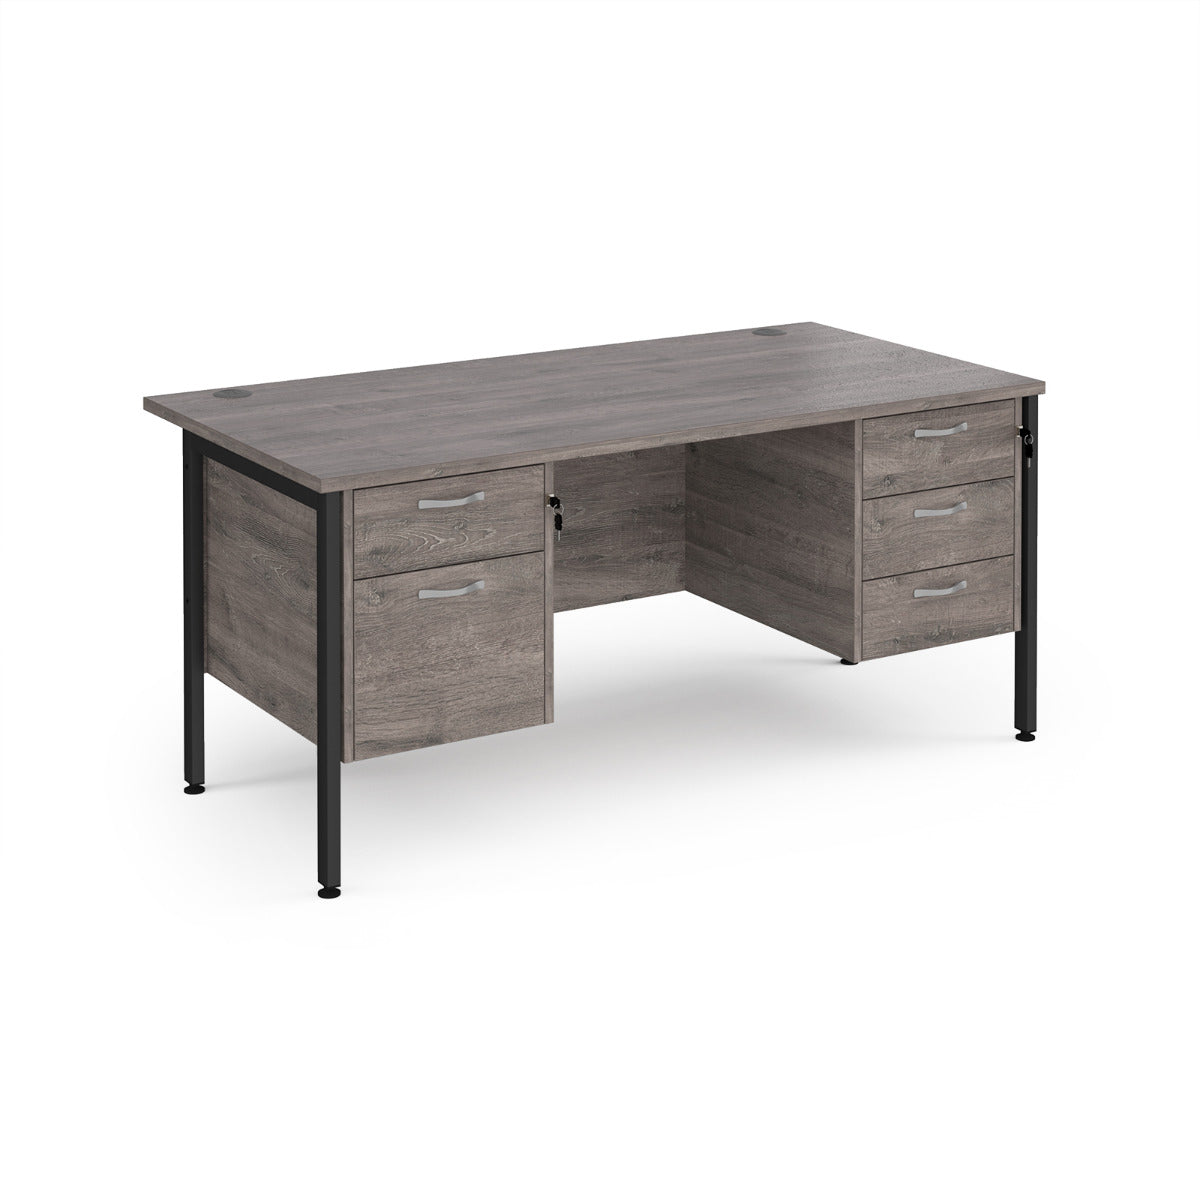 Maestro 800mm Deep Straight H Office Desk with Two and Three Drawer Pedestal